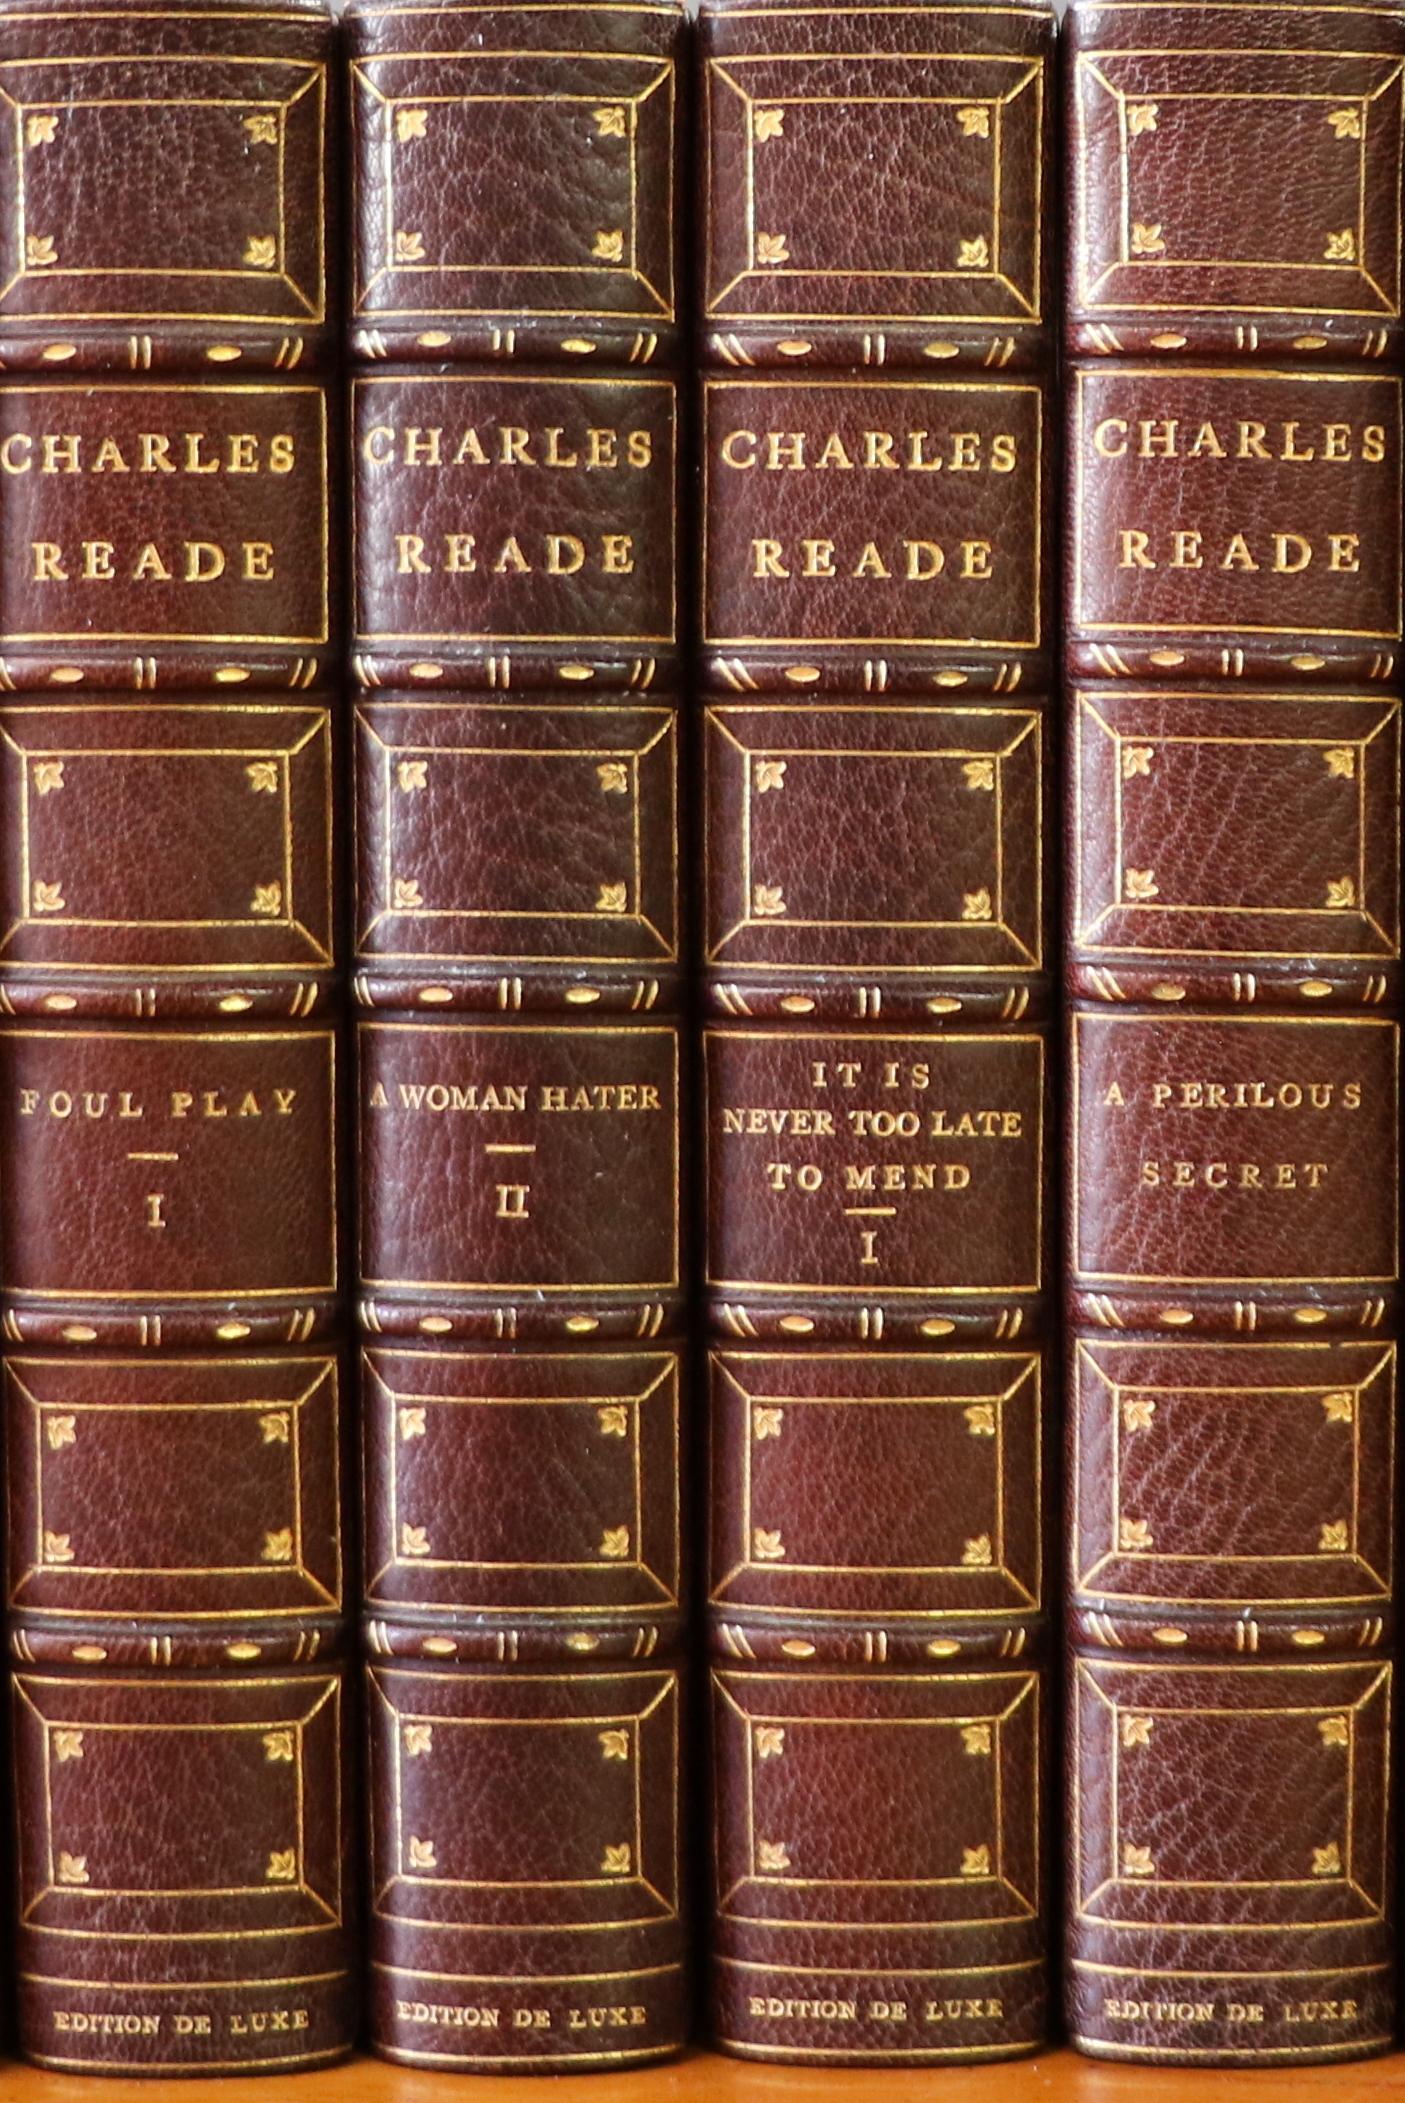 20th Century Books, Complete Works of Charles Reade